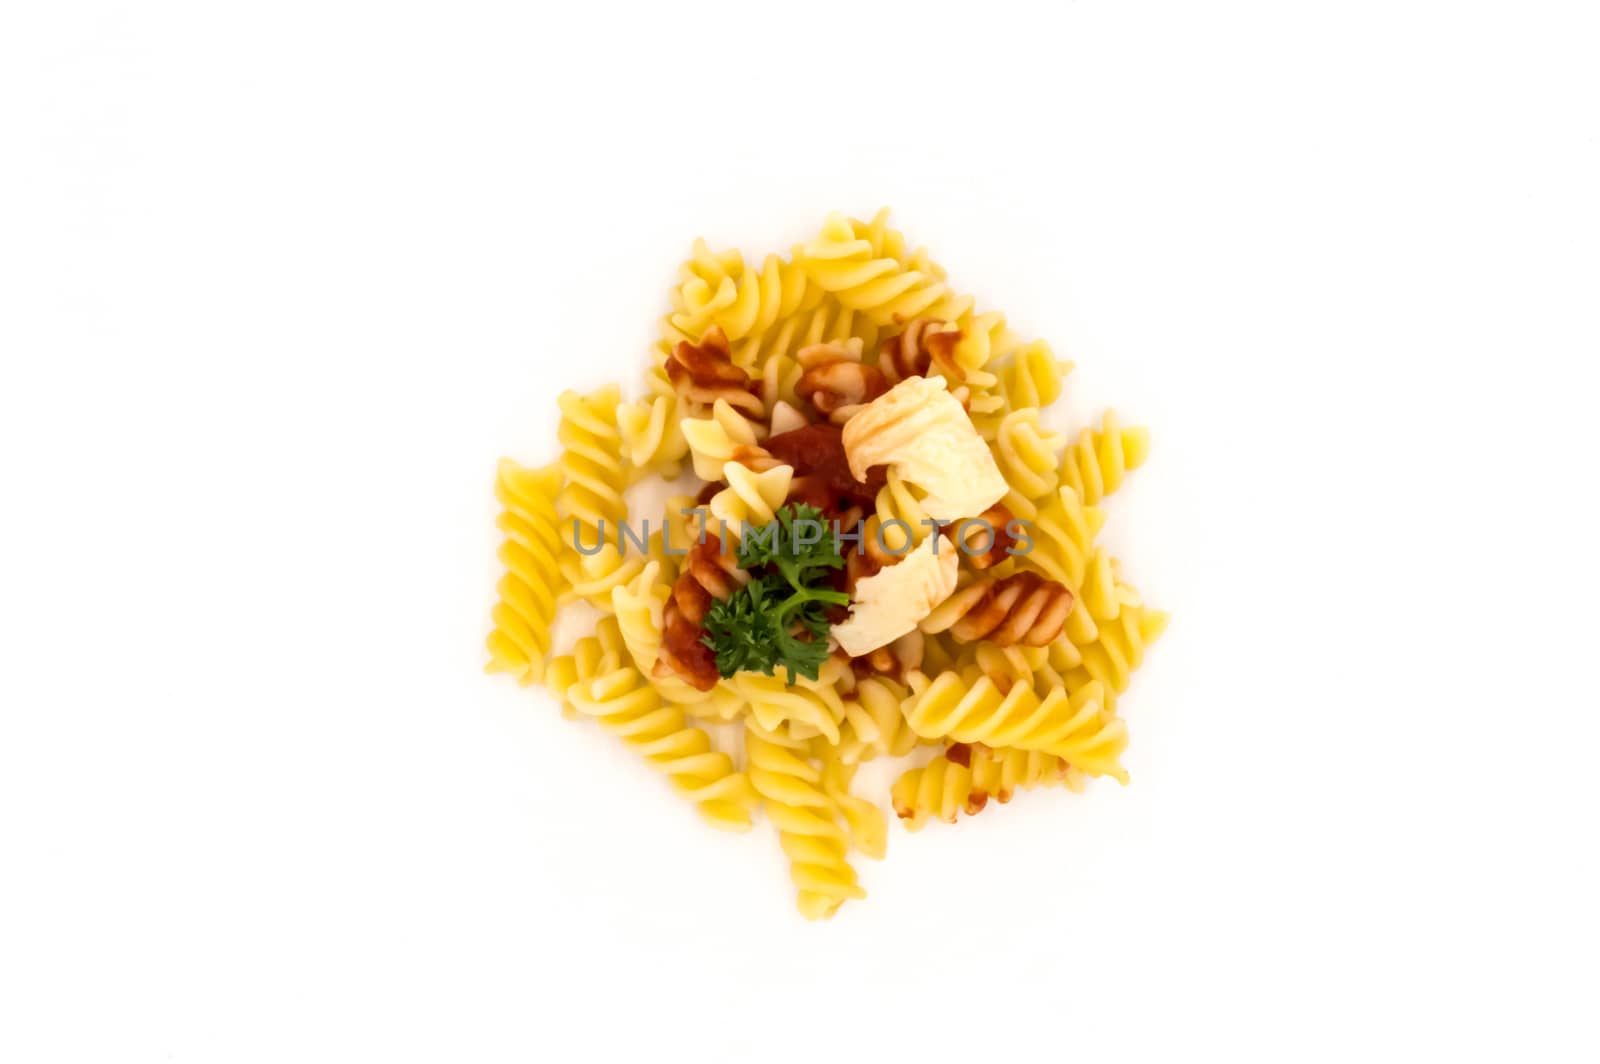 Twisted pasta with a tomato coulis and gruyere cheese viewed from above on a white background